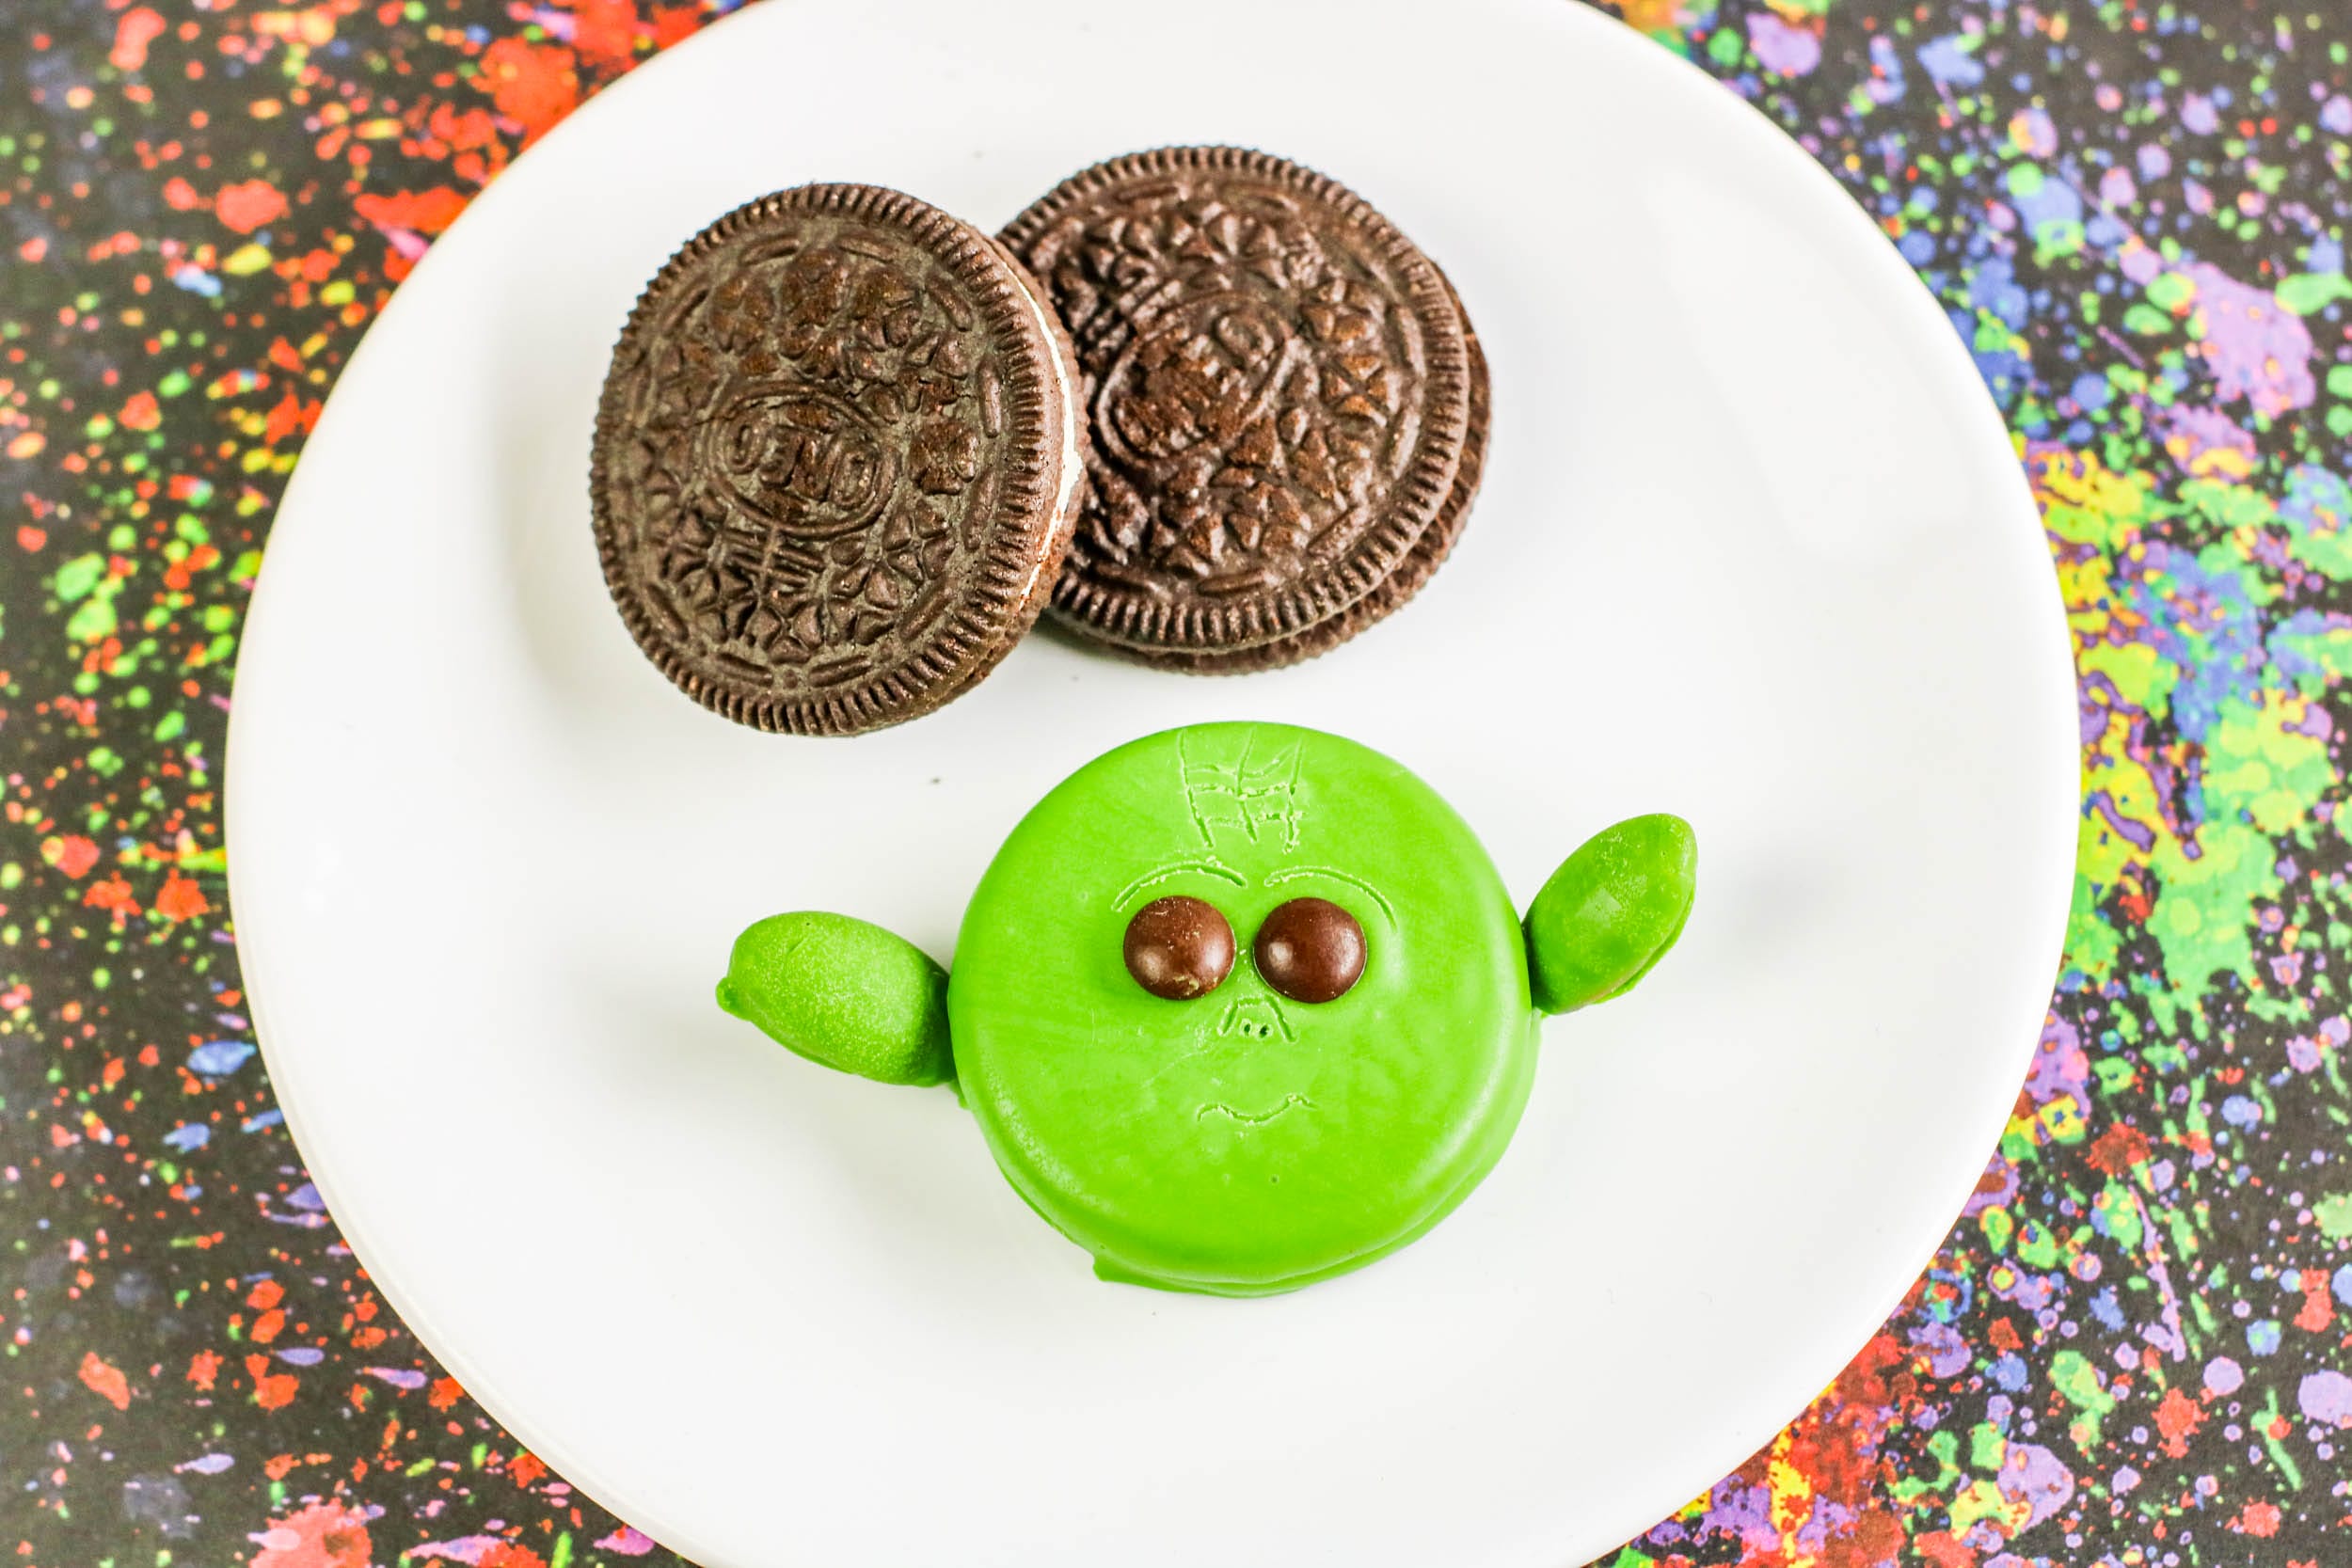 May the 4th be with you! Did you know that today, May 4, is Star Wars Day? I have some adorable Baby Yoda Cookies that are perfect for the celebration. Requiring few ingredients, these dipped OREO no-bake Baby Yoda cookies are super easy to make and taste amazing.